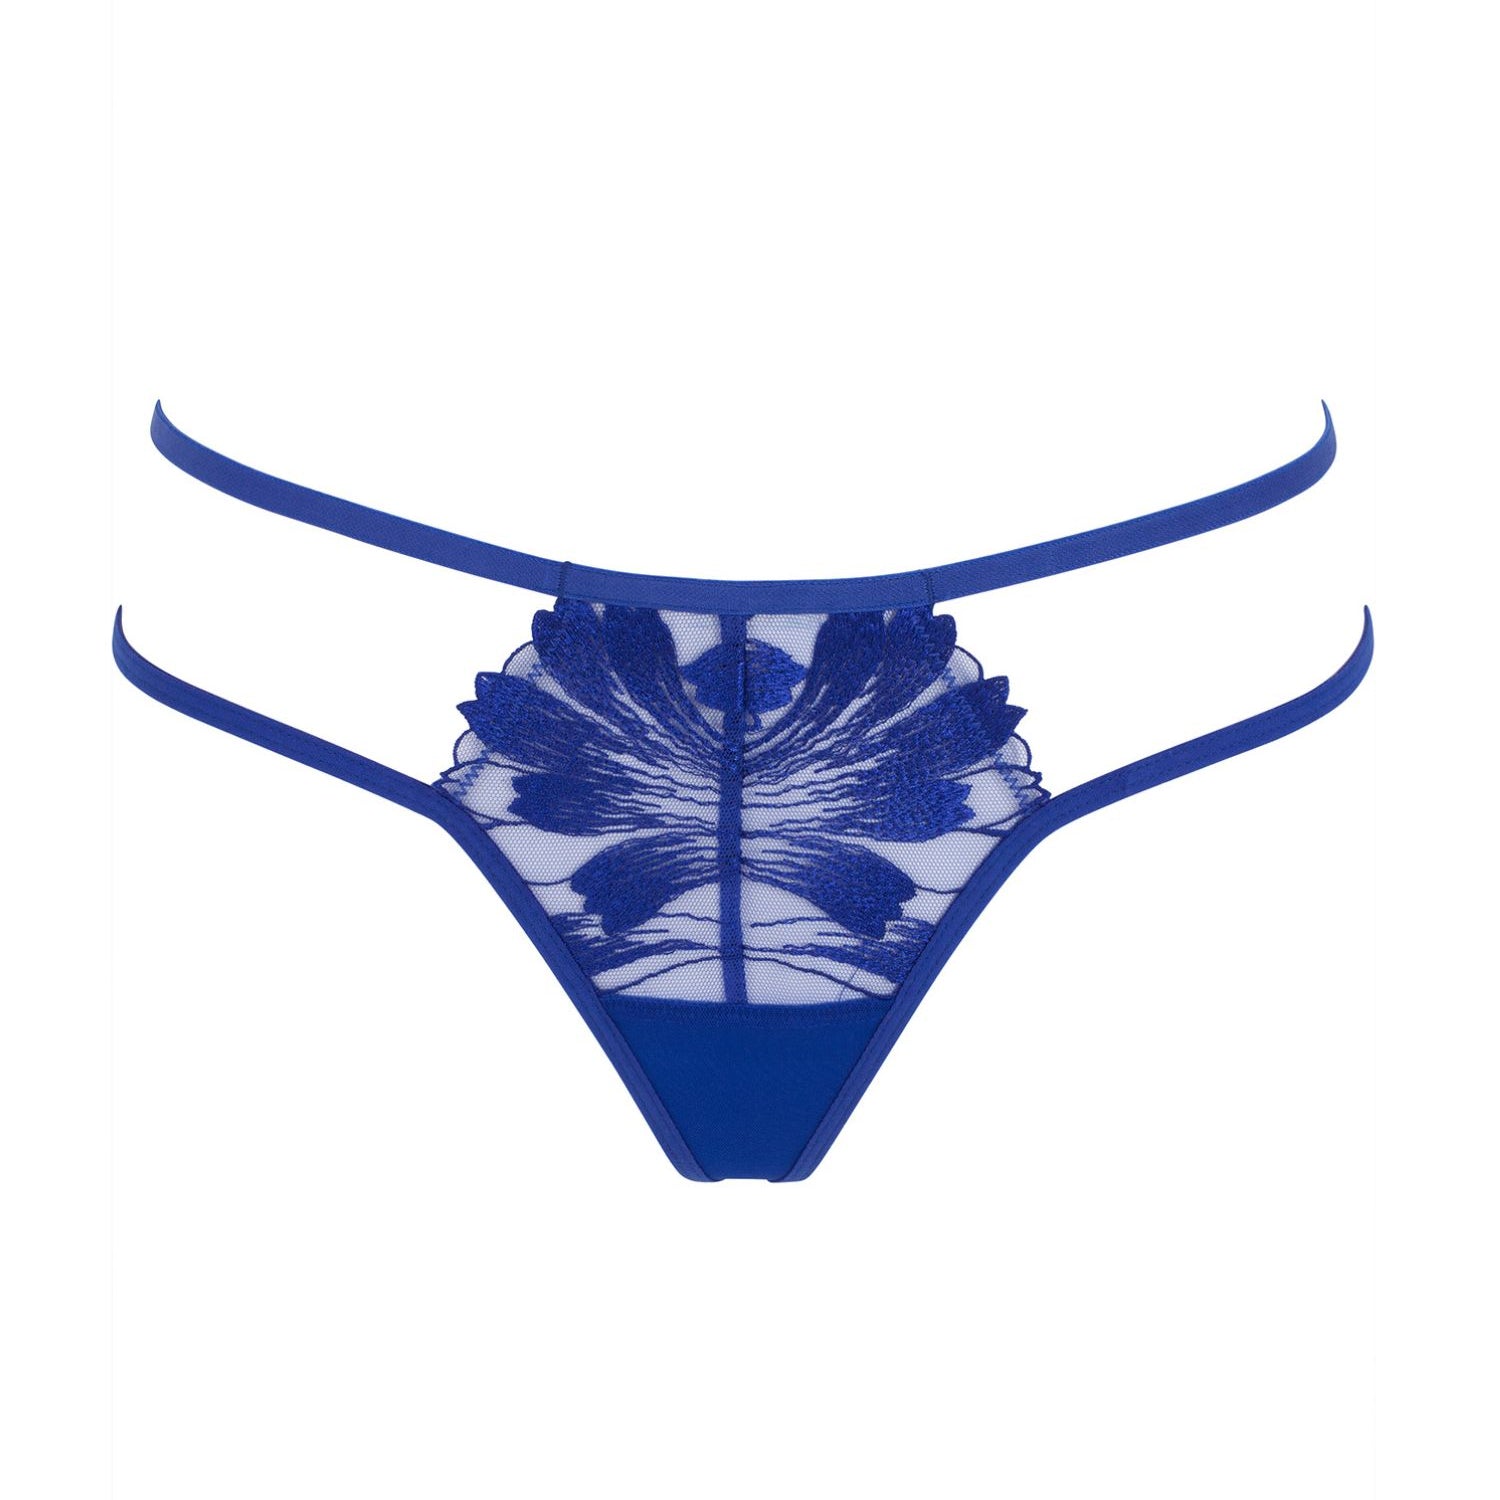 Bluebella Colette Thong - Blue Embroidery G-String, Cutout Design | Avec Amour Sexy Lingerie